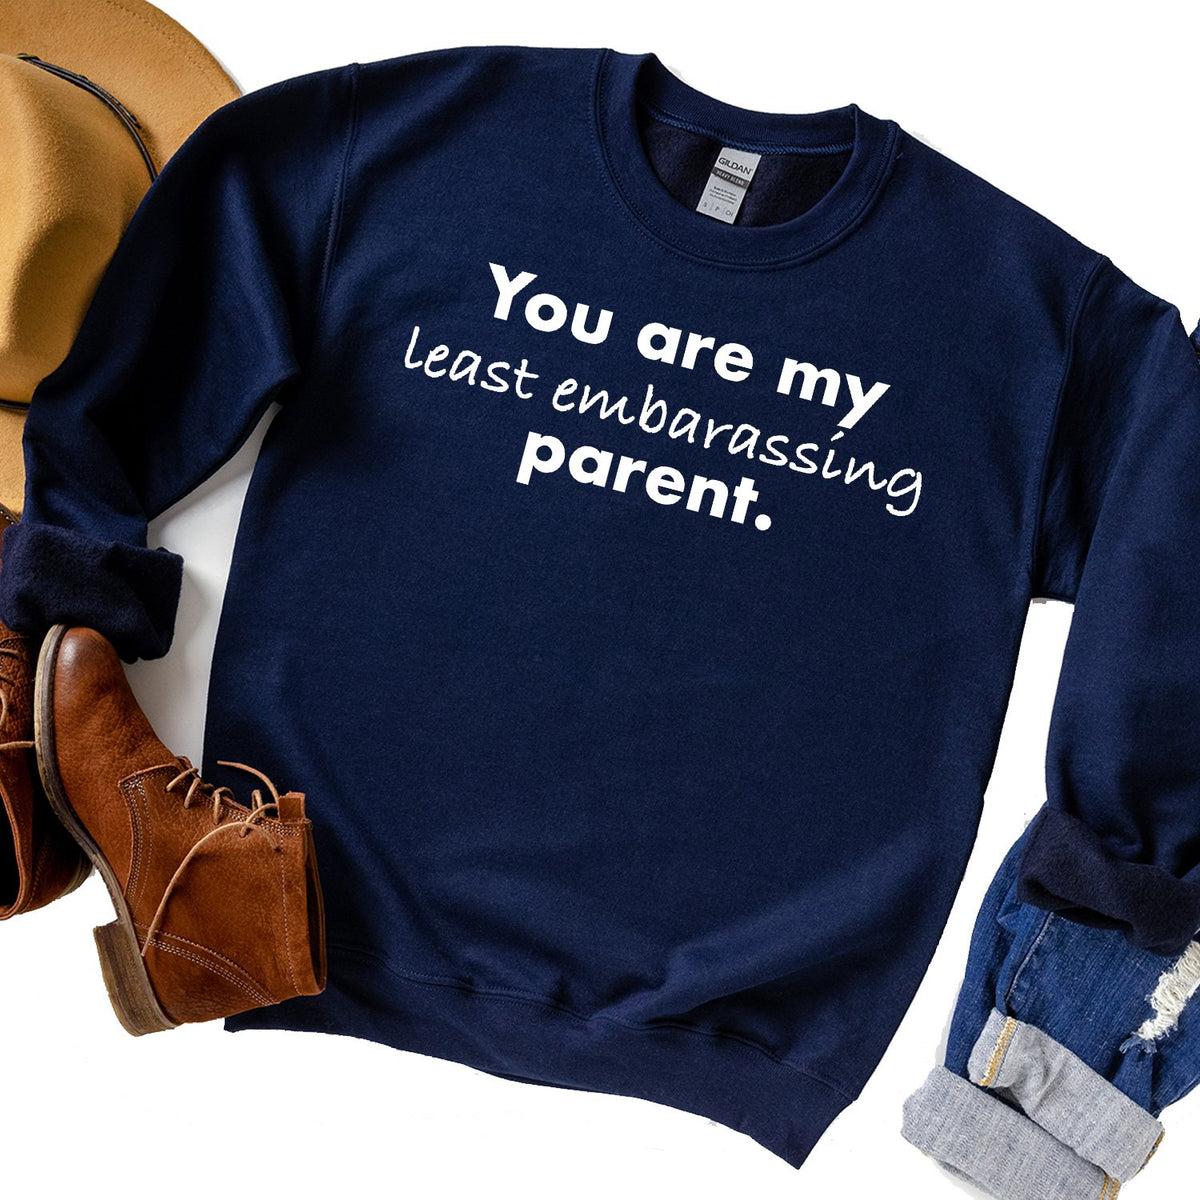 You Are My Least Embarassing Parent - Long Sleeve Heavy Crewneck Sweatshirt